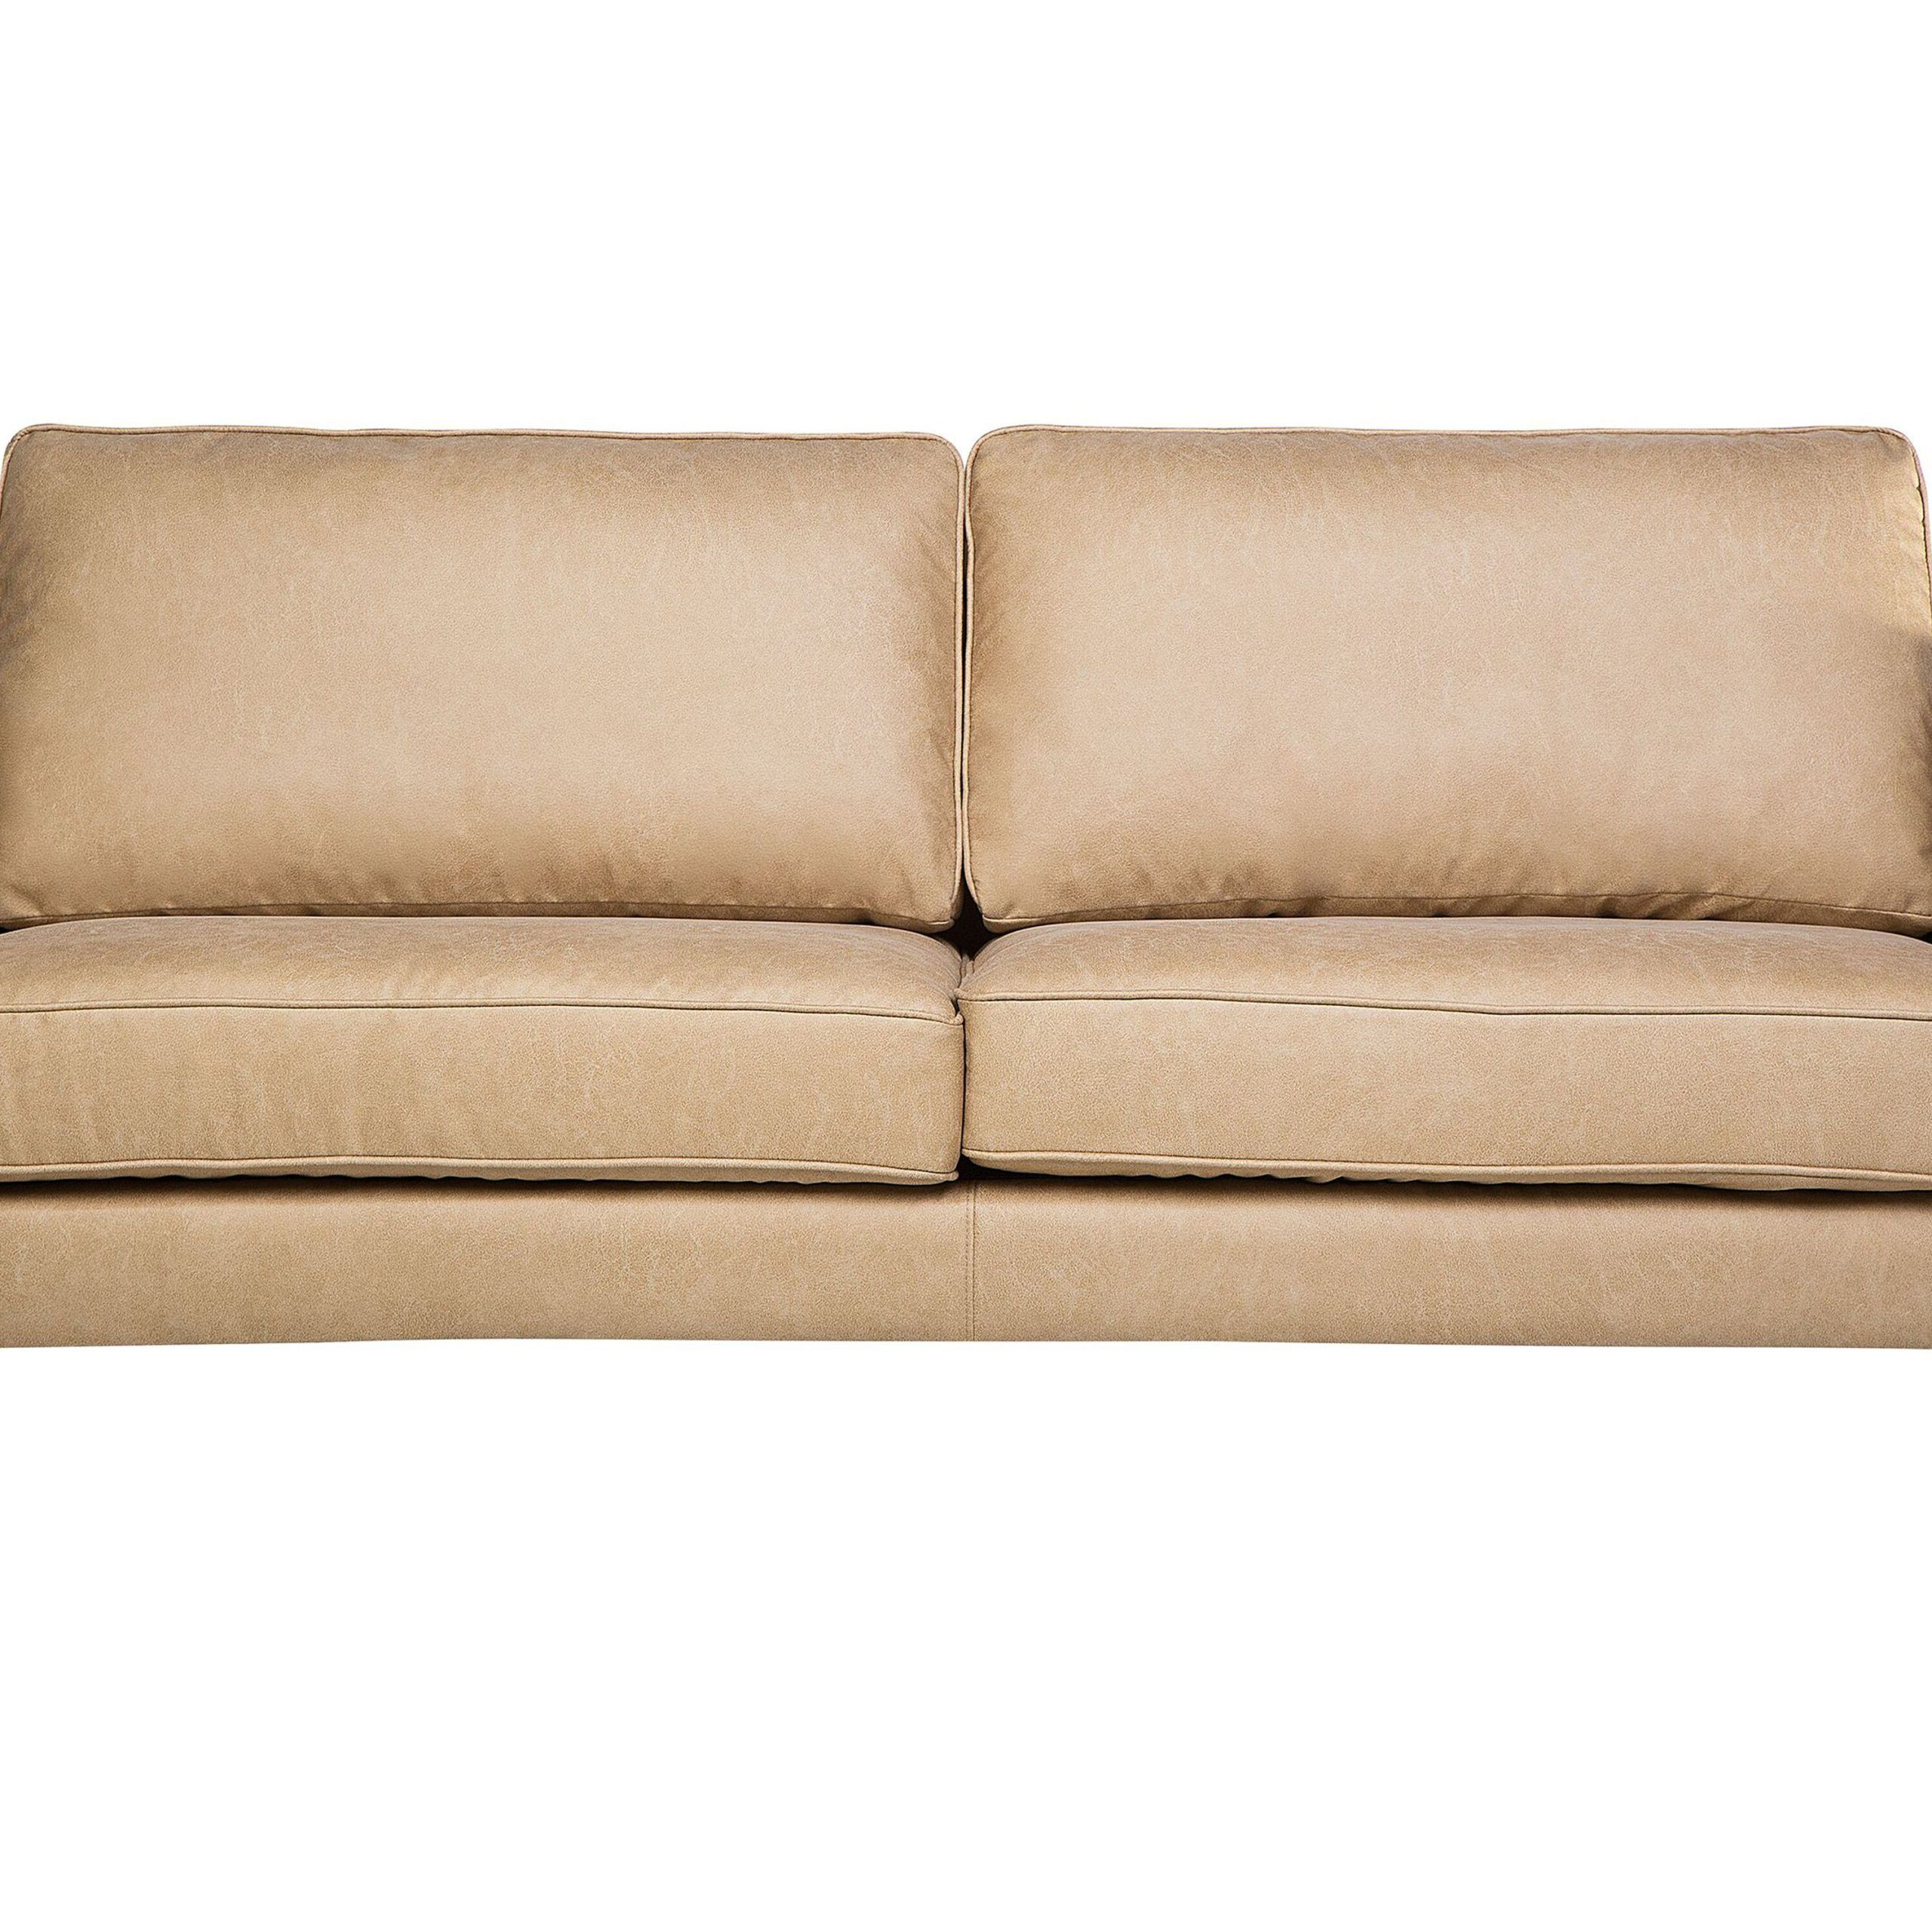 3 Seater Faux Leather Sofa Beige Savalen | Beliani.co.uk Within Traditional 3 Seater Faux Leather Sofas (Gallery 9 of 20)